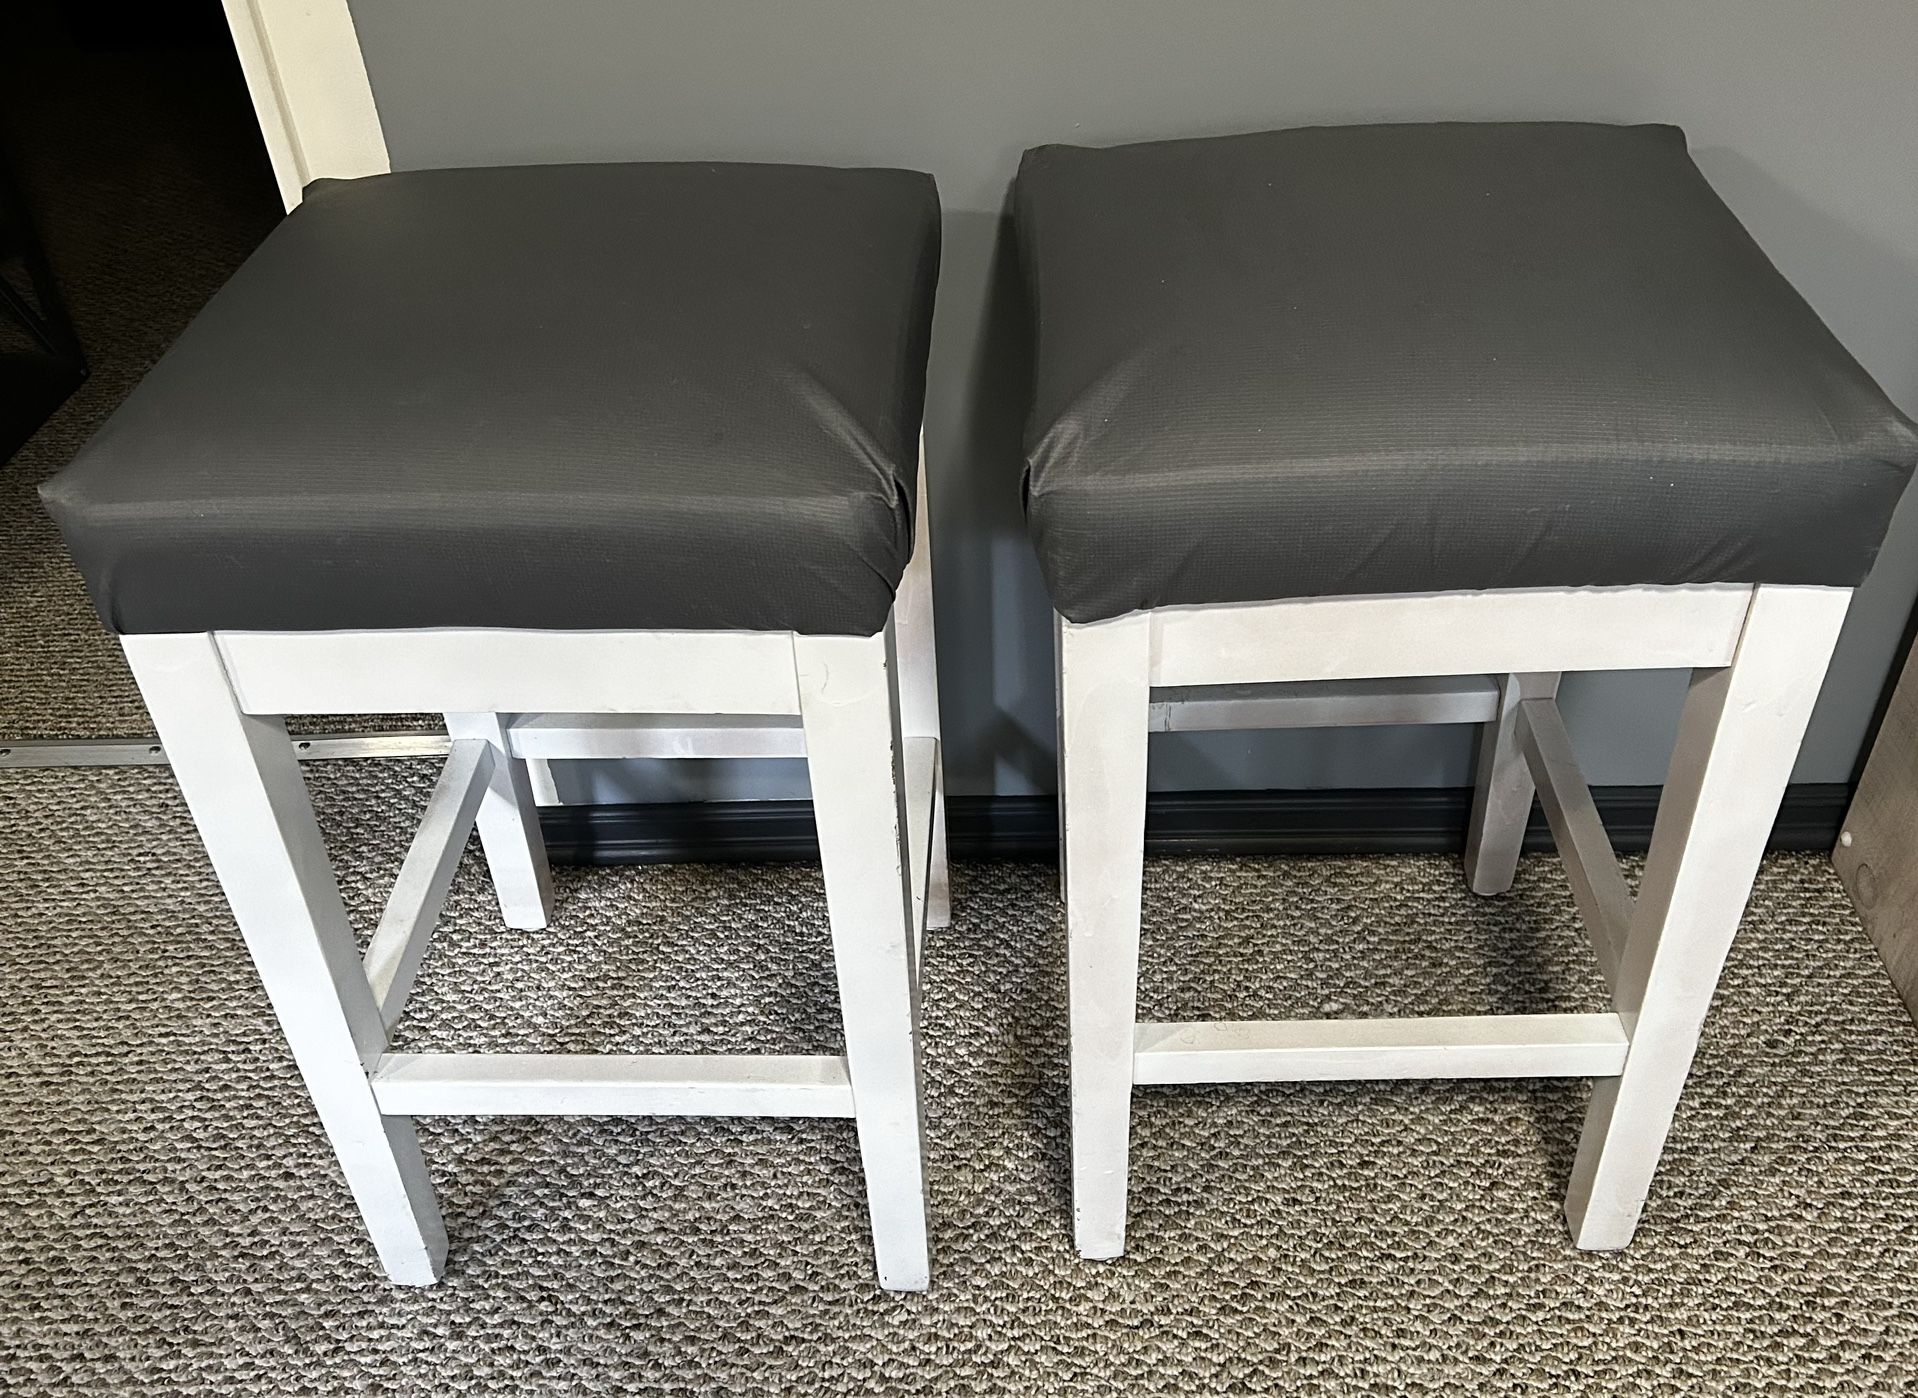 A Pair Of 26”H Heavily Padded, Gray, And White Wood Barstools